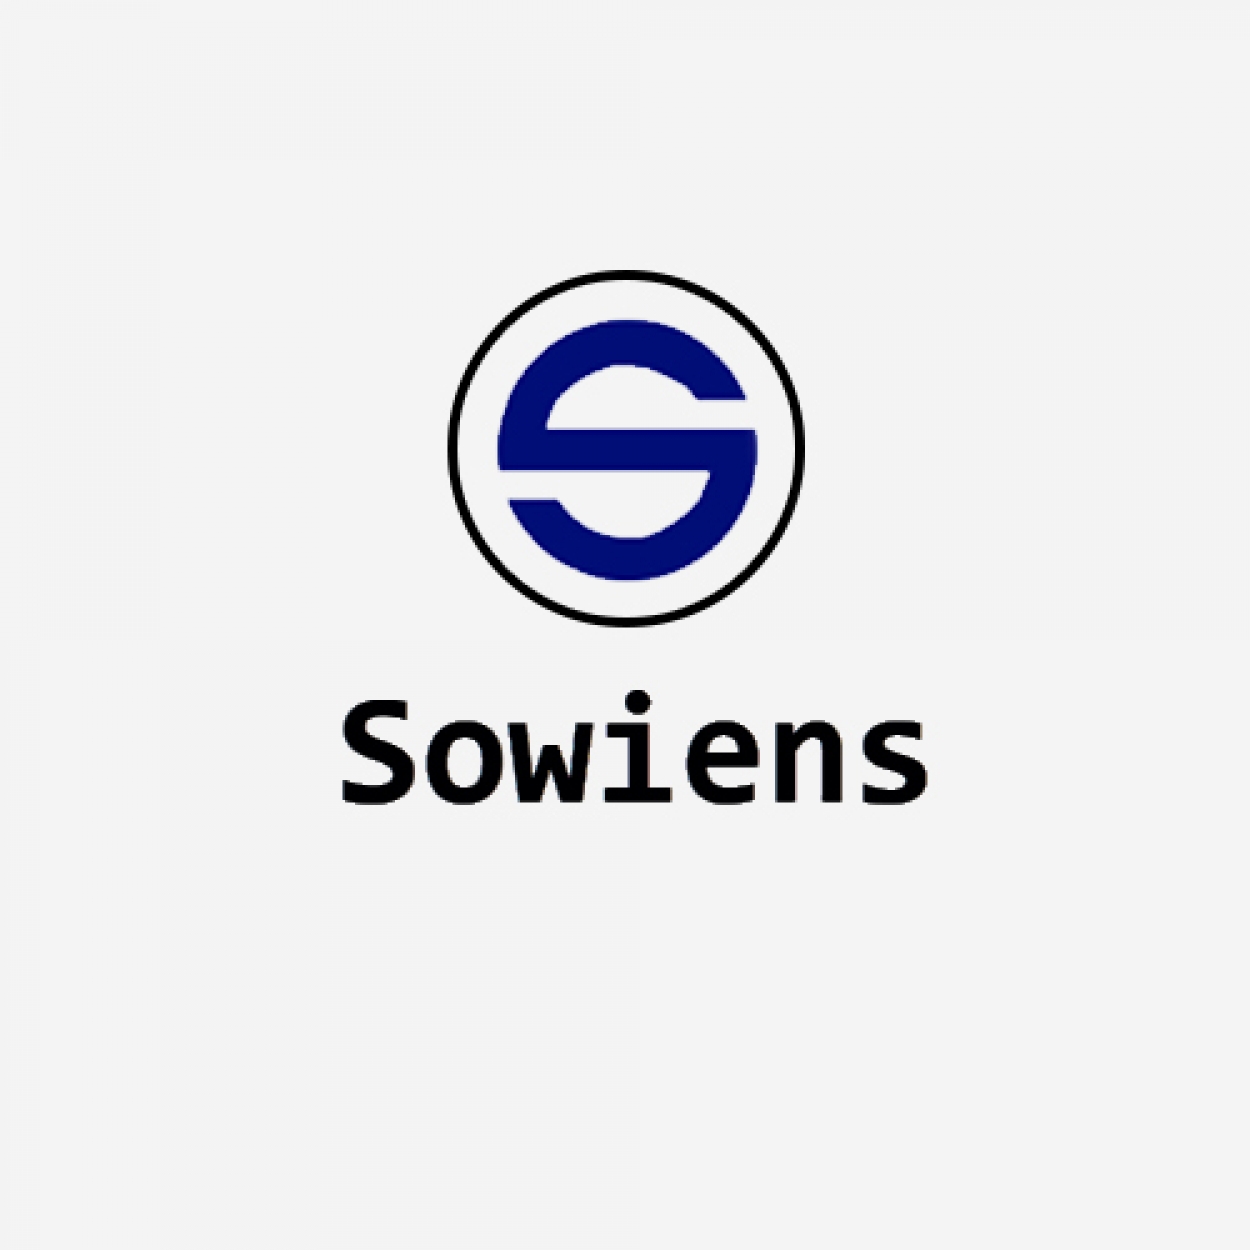 SOWIENS